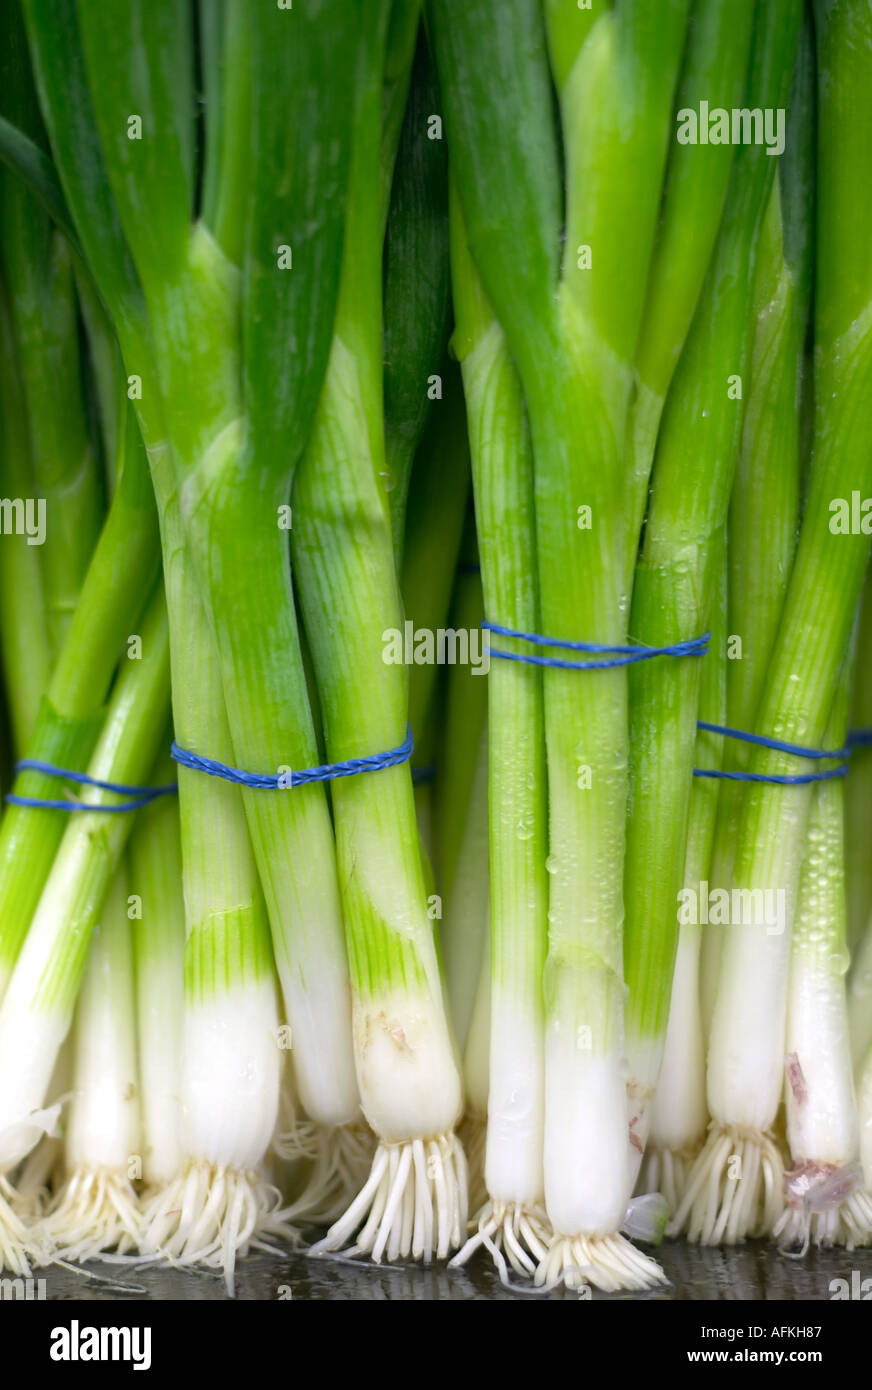 Green onion bunches Stock Photo